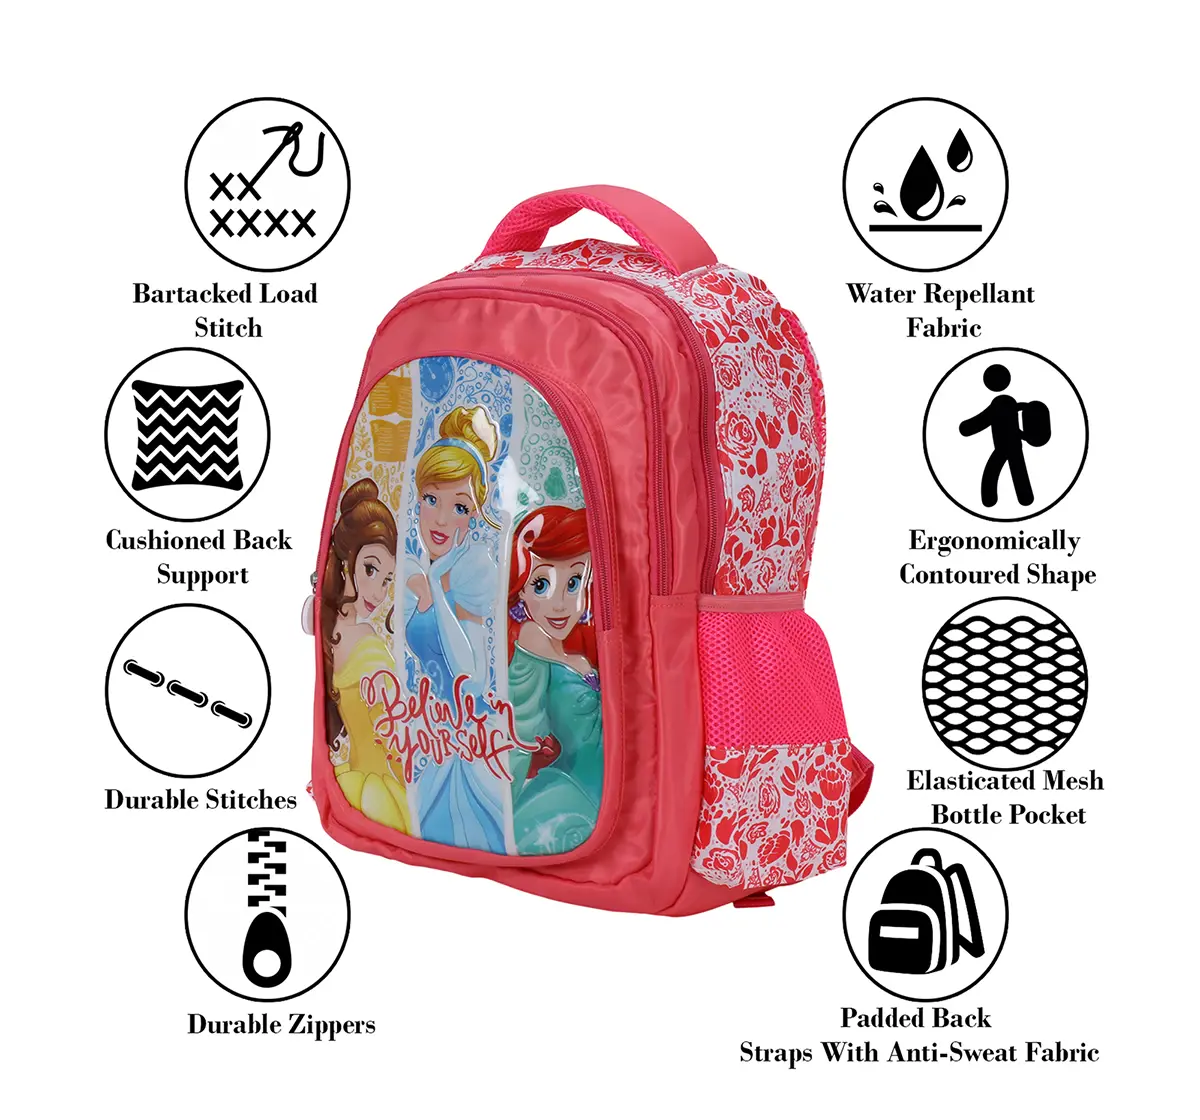 Disney Princess Believe In Yourself 14" Backpack Bags for age 3Y+ 